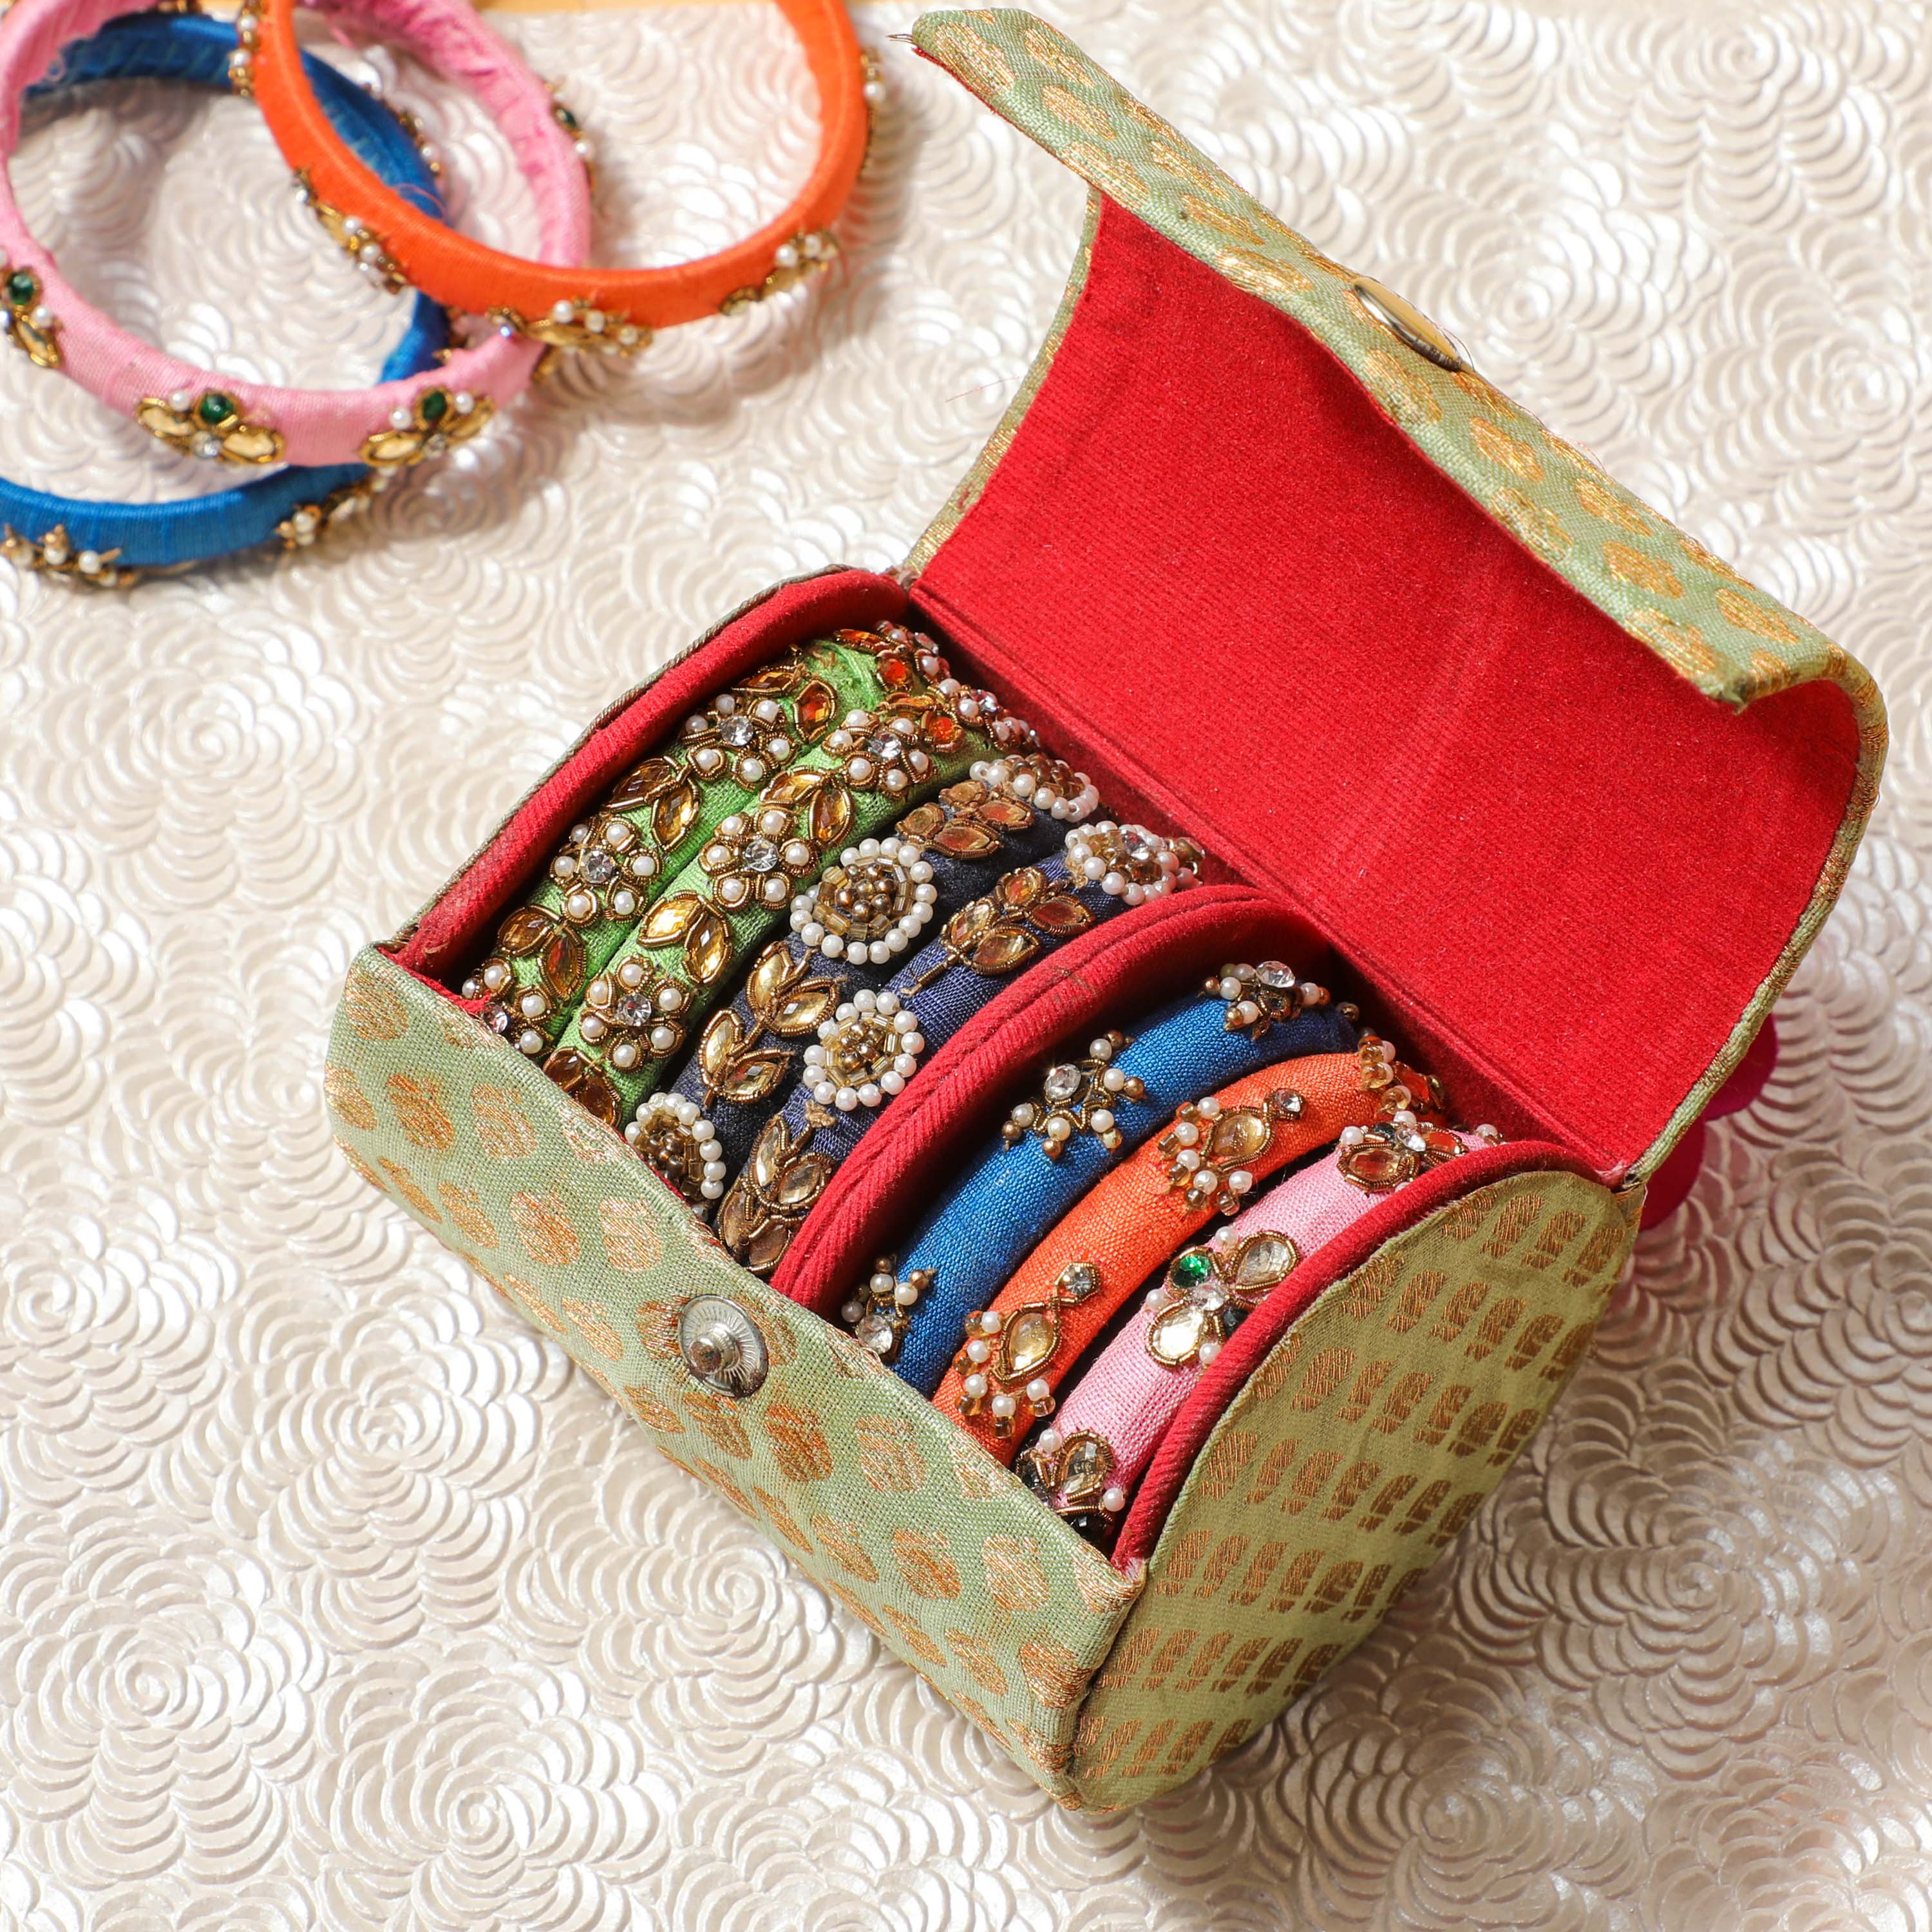 Budget Friendly Indian Traditional Gifts Under $10